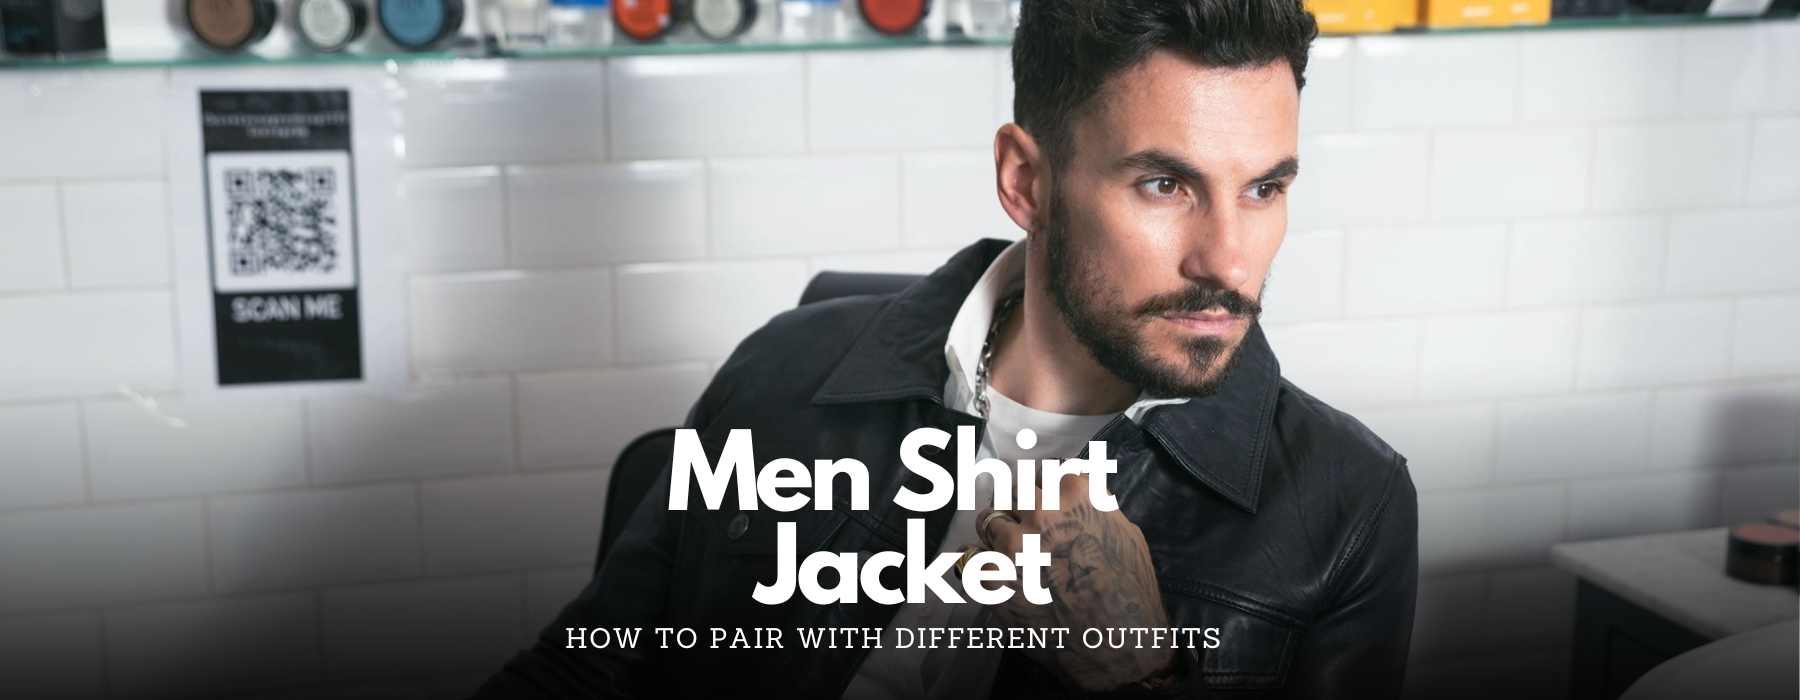 Effortless Cool: How to Wear and Pair Men's Shirt Jackets